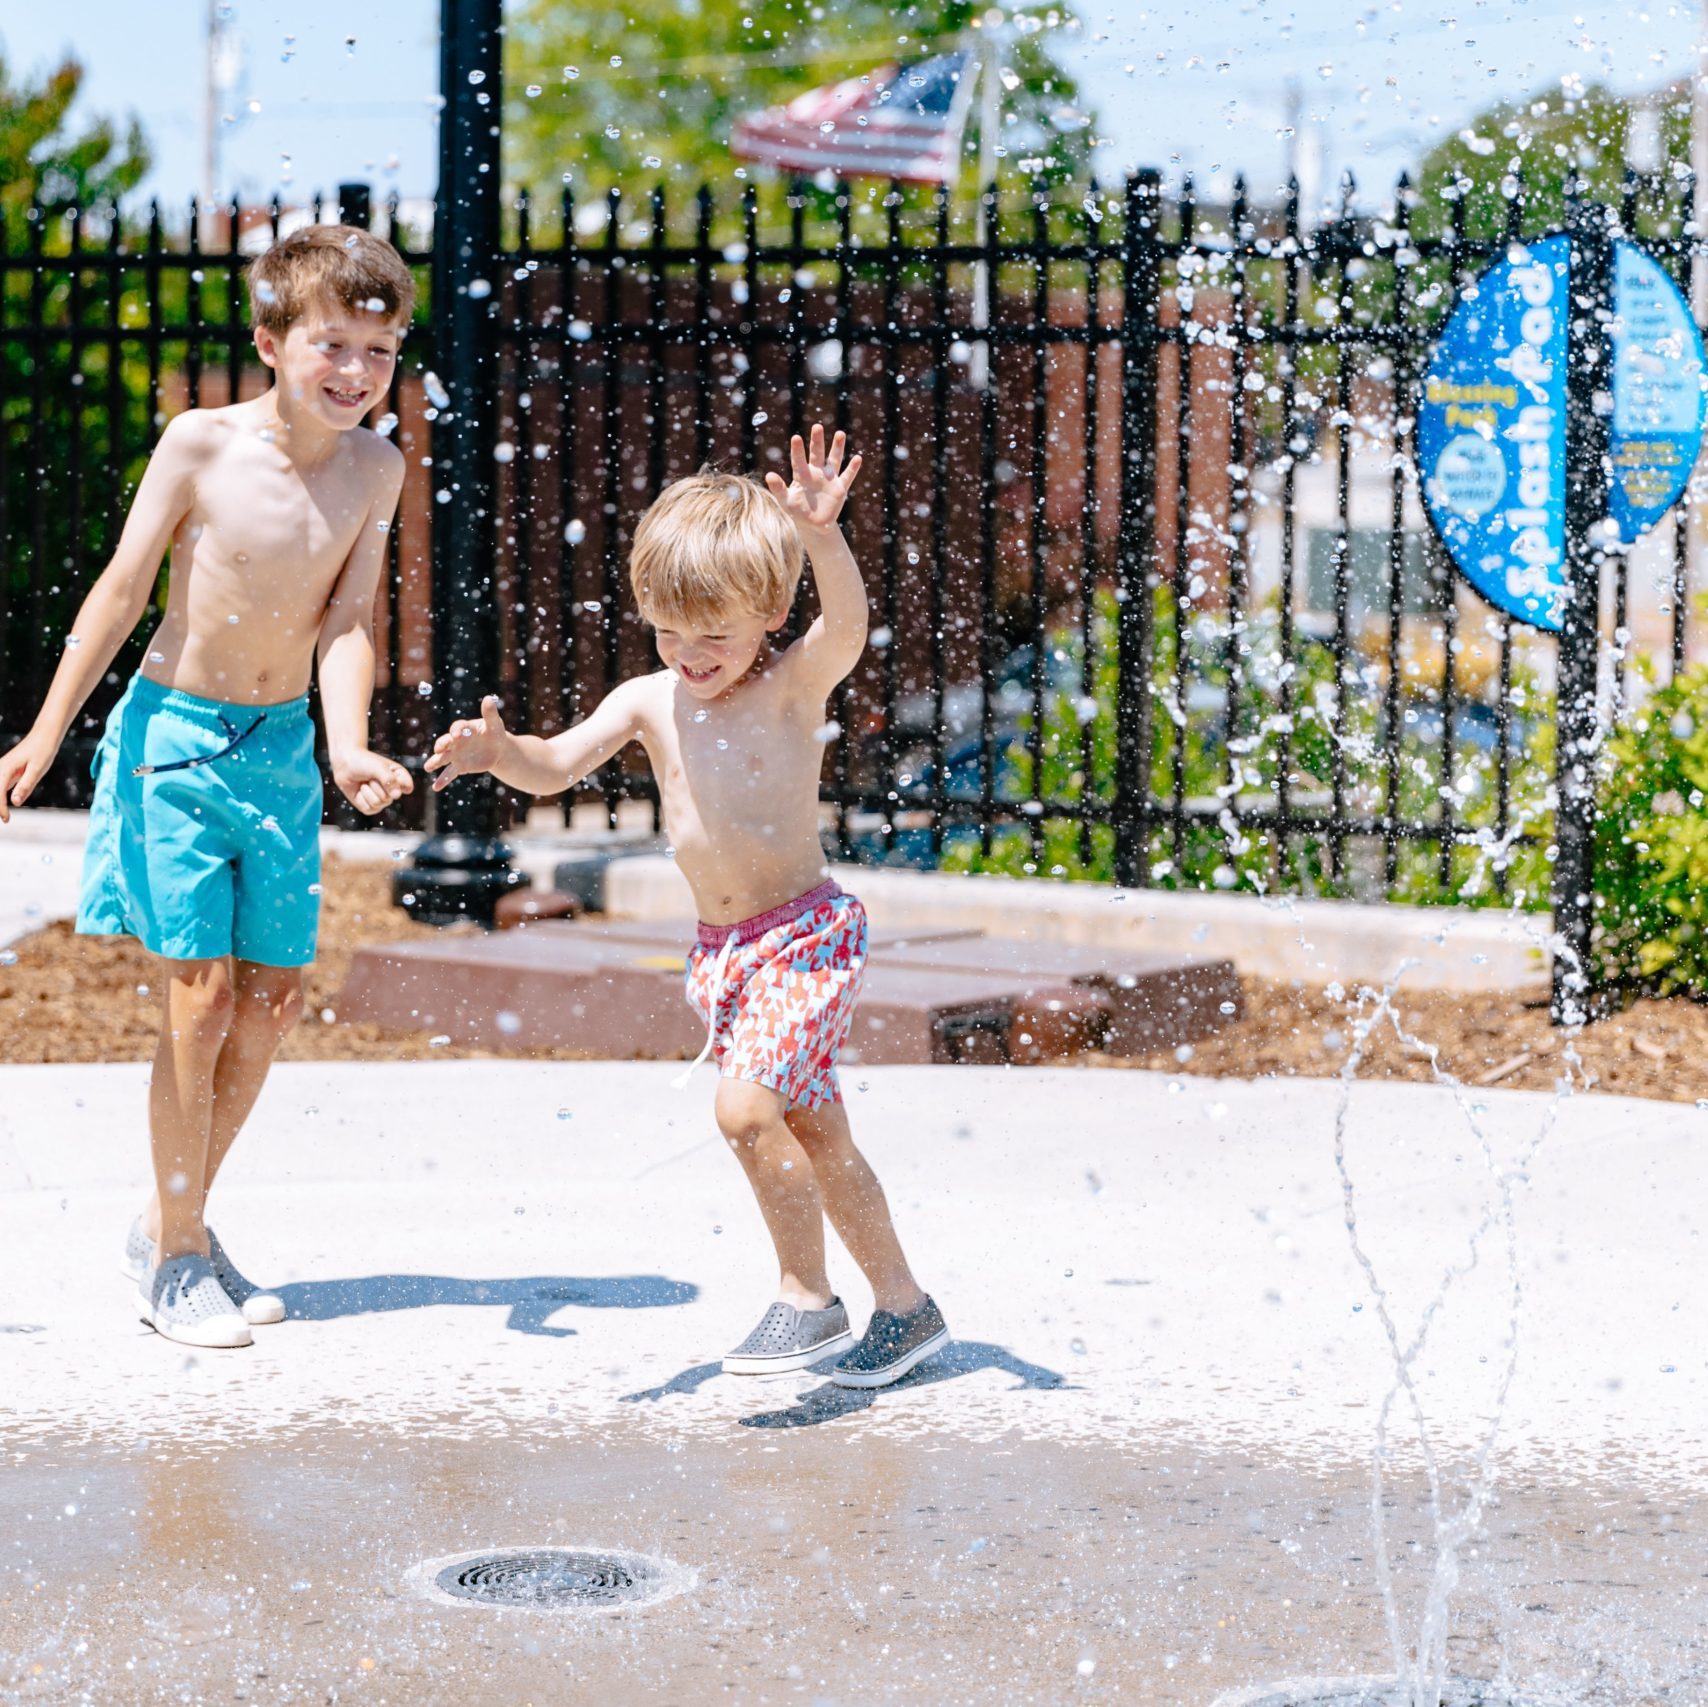 Two children play in a sprinkler at Blessing Park in High Point, NC.